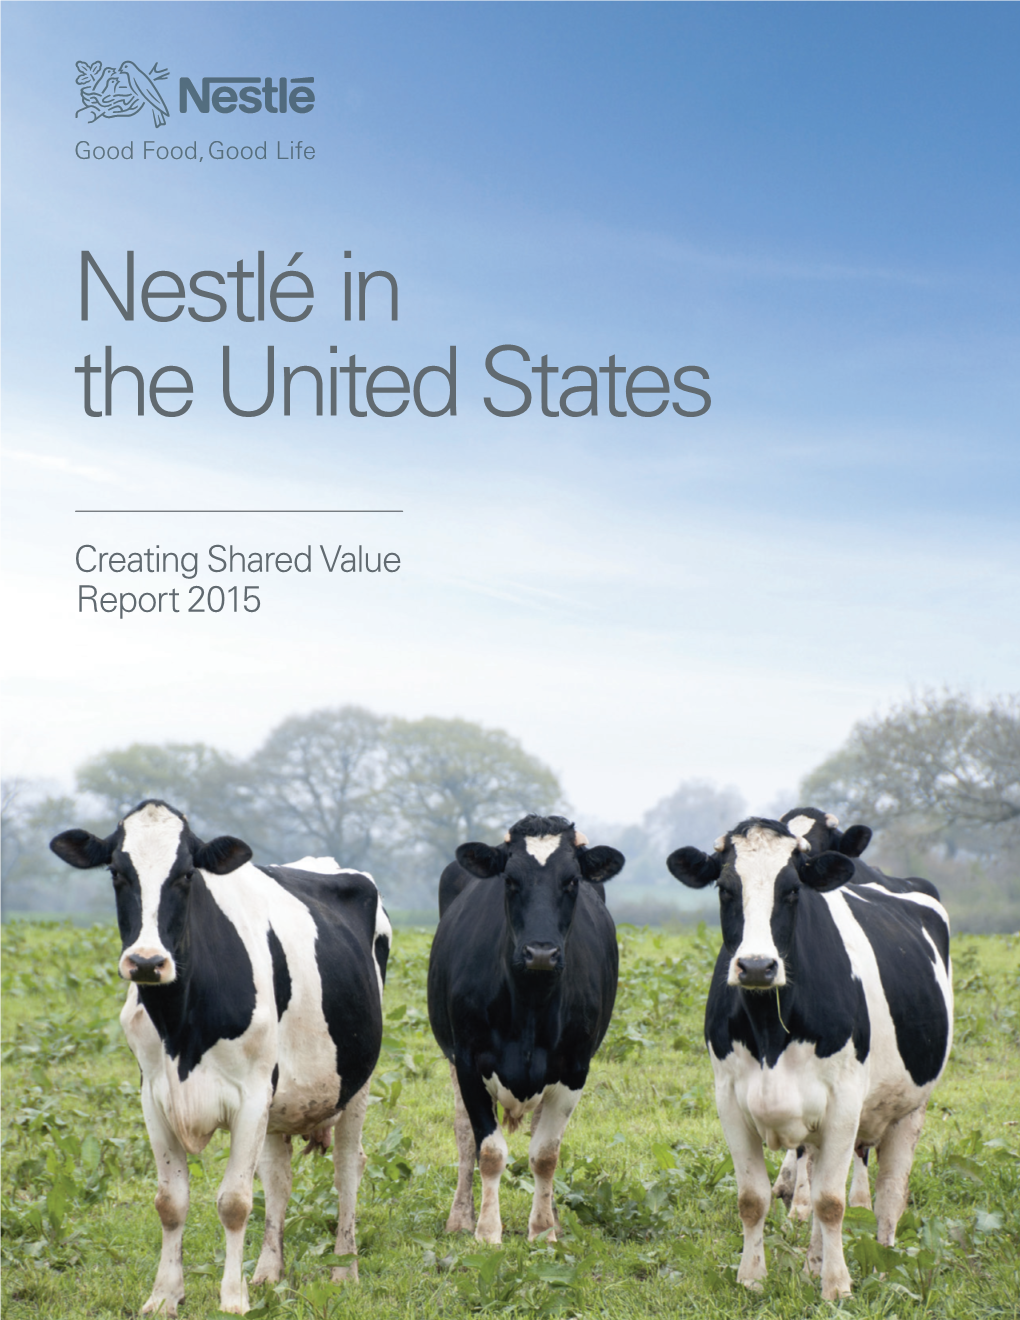 Nestlé in the United States